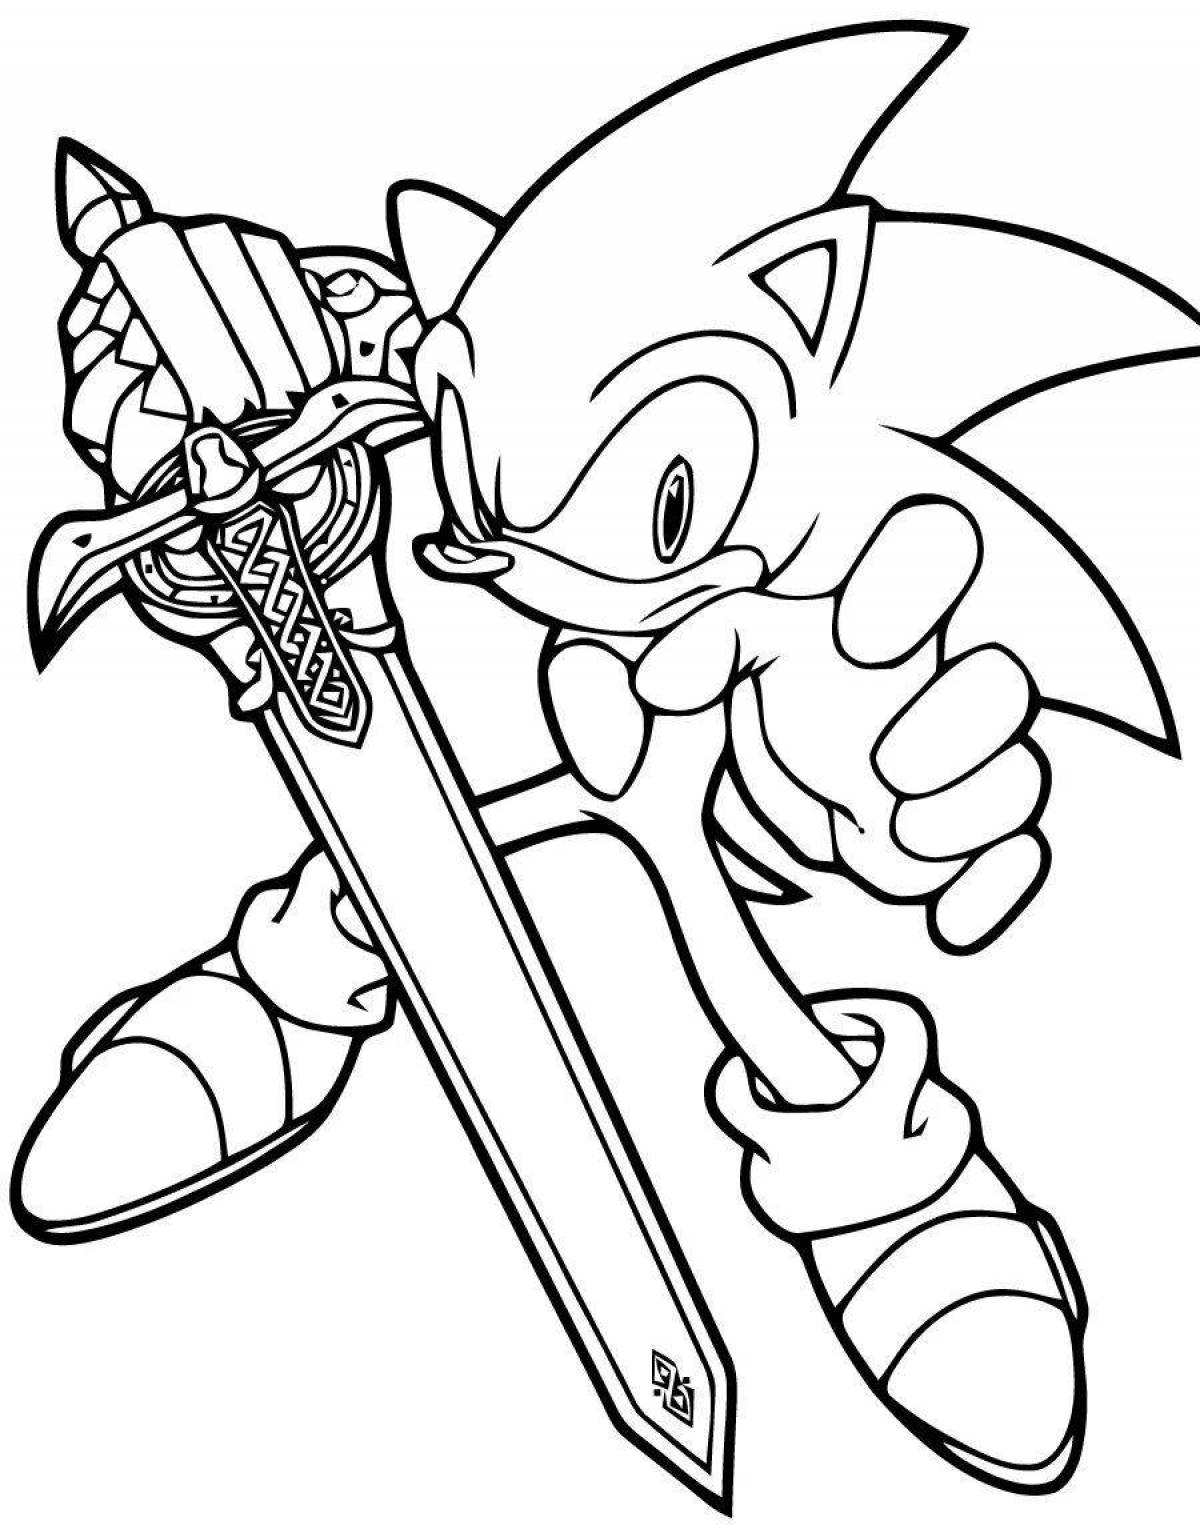 Minecraft sonic bright coloring